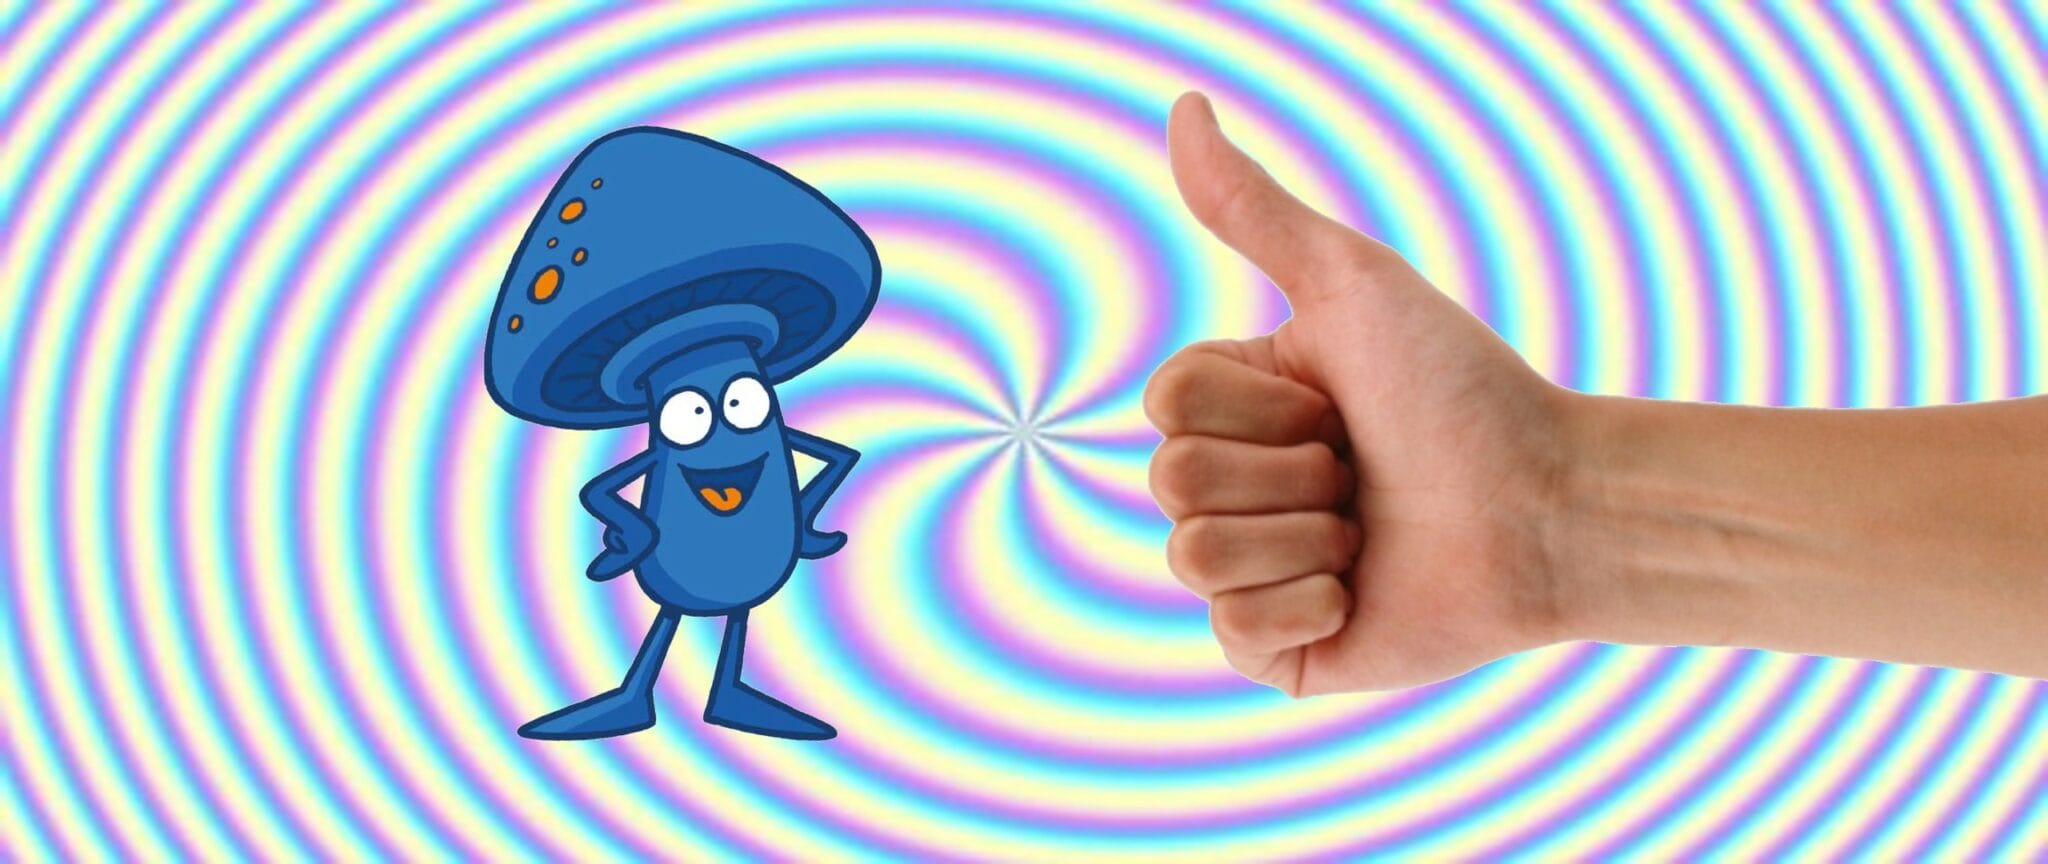 shrooma mushroom and hand doing thumbs up on psychedelic background